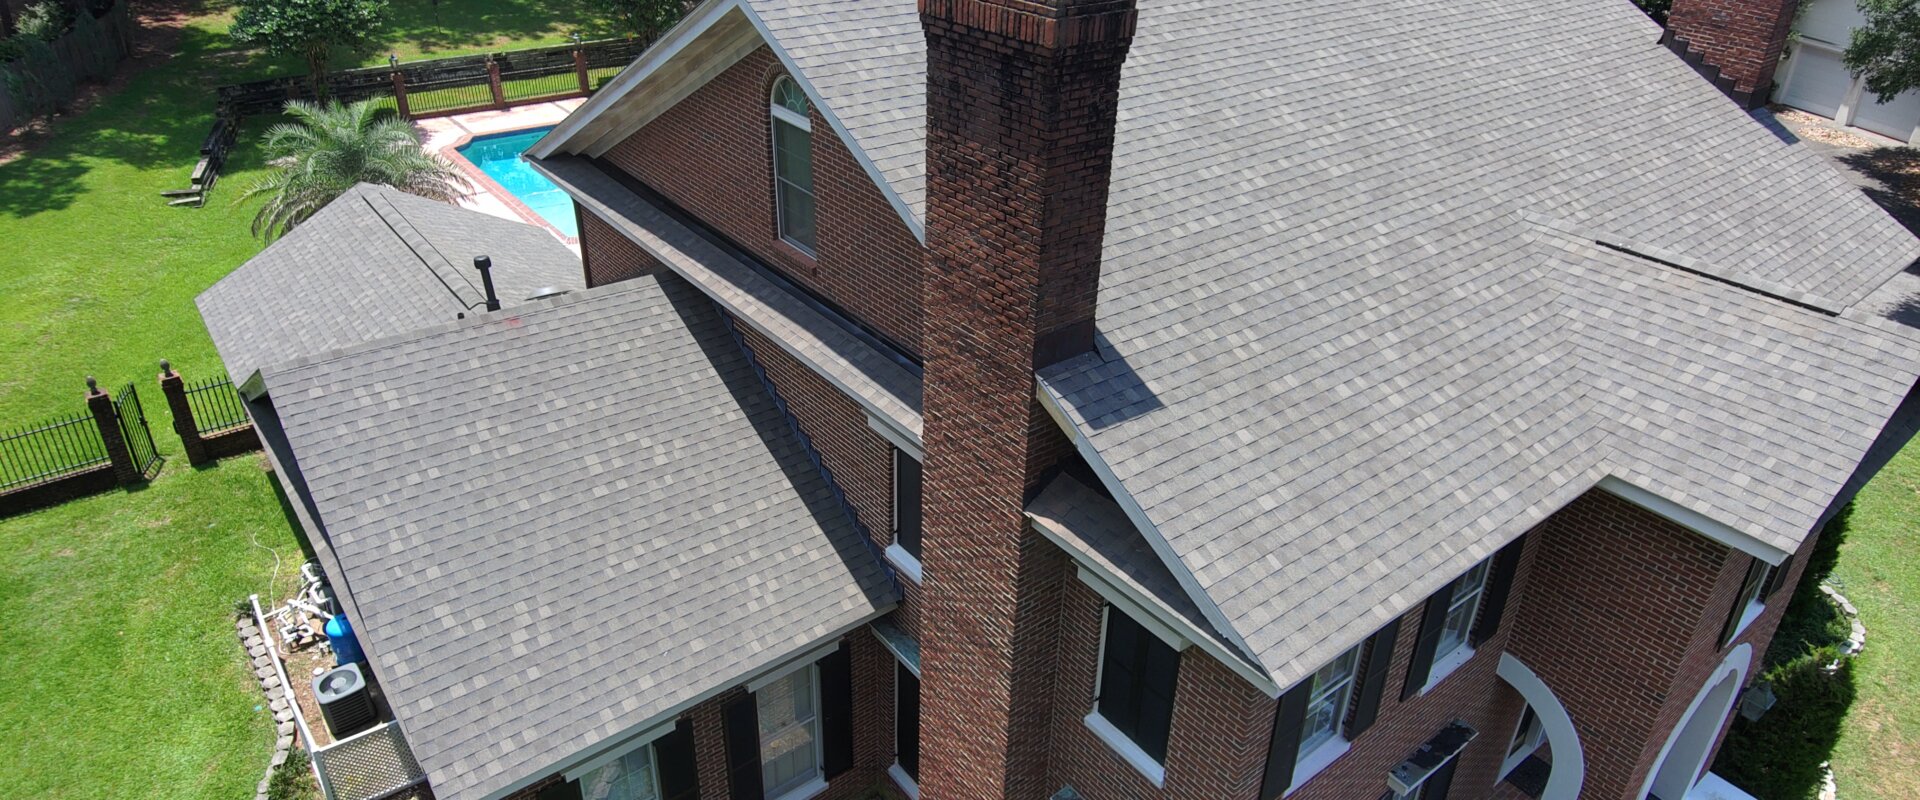 Residential-Roofing-Services-Mobile-AL